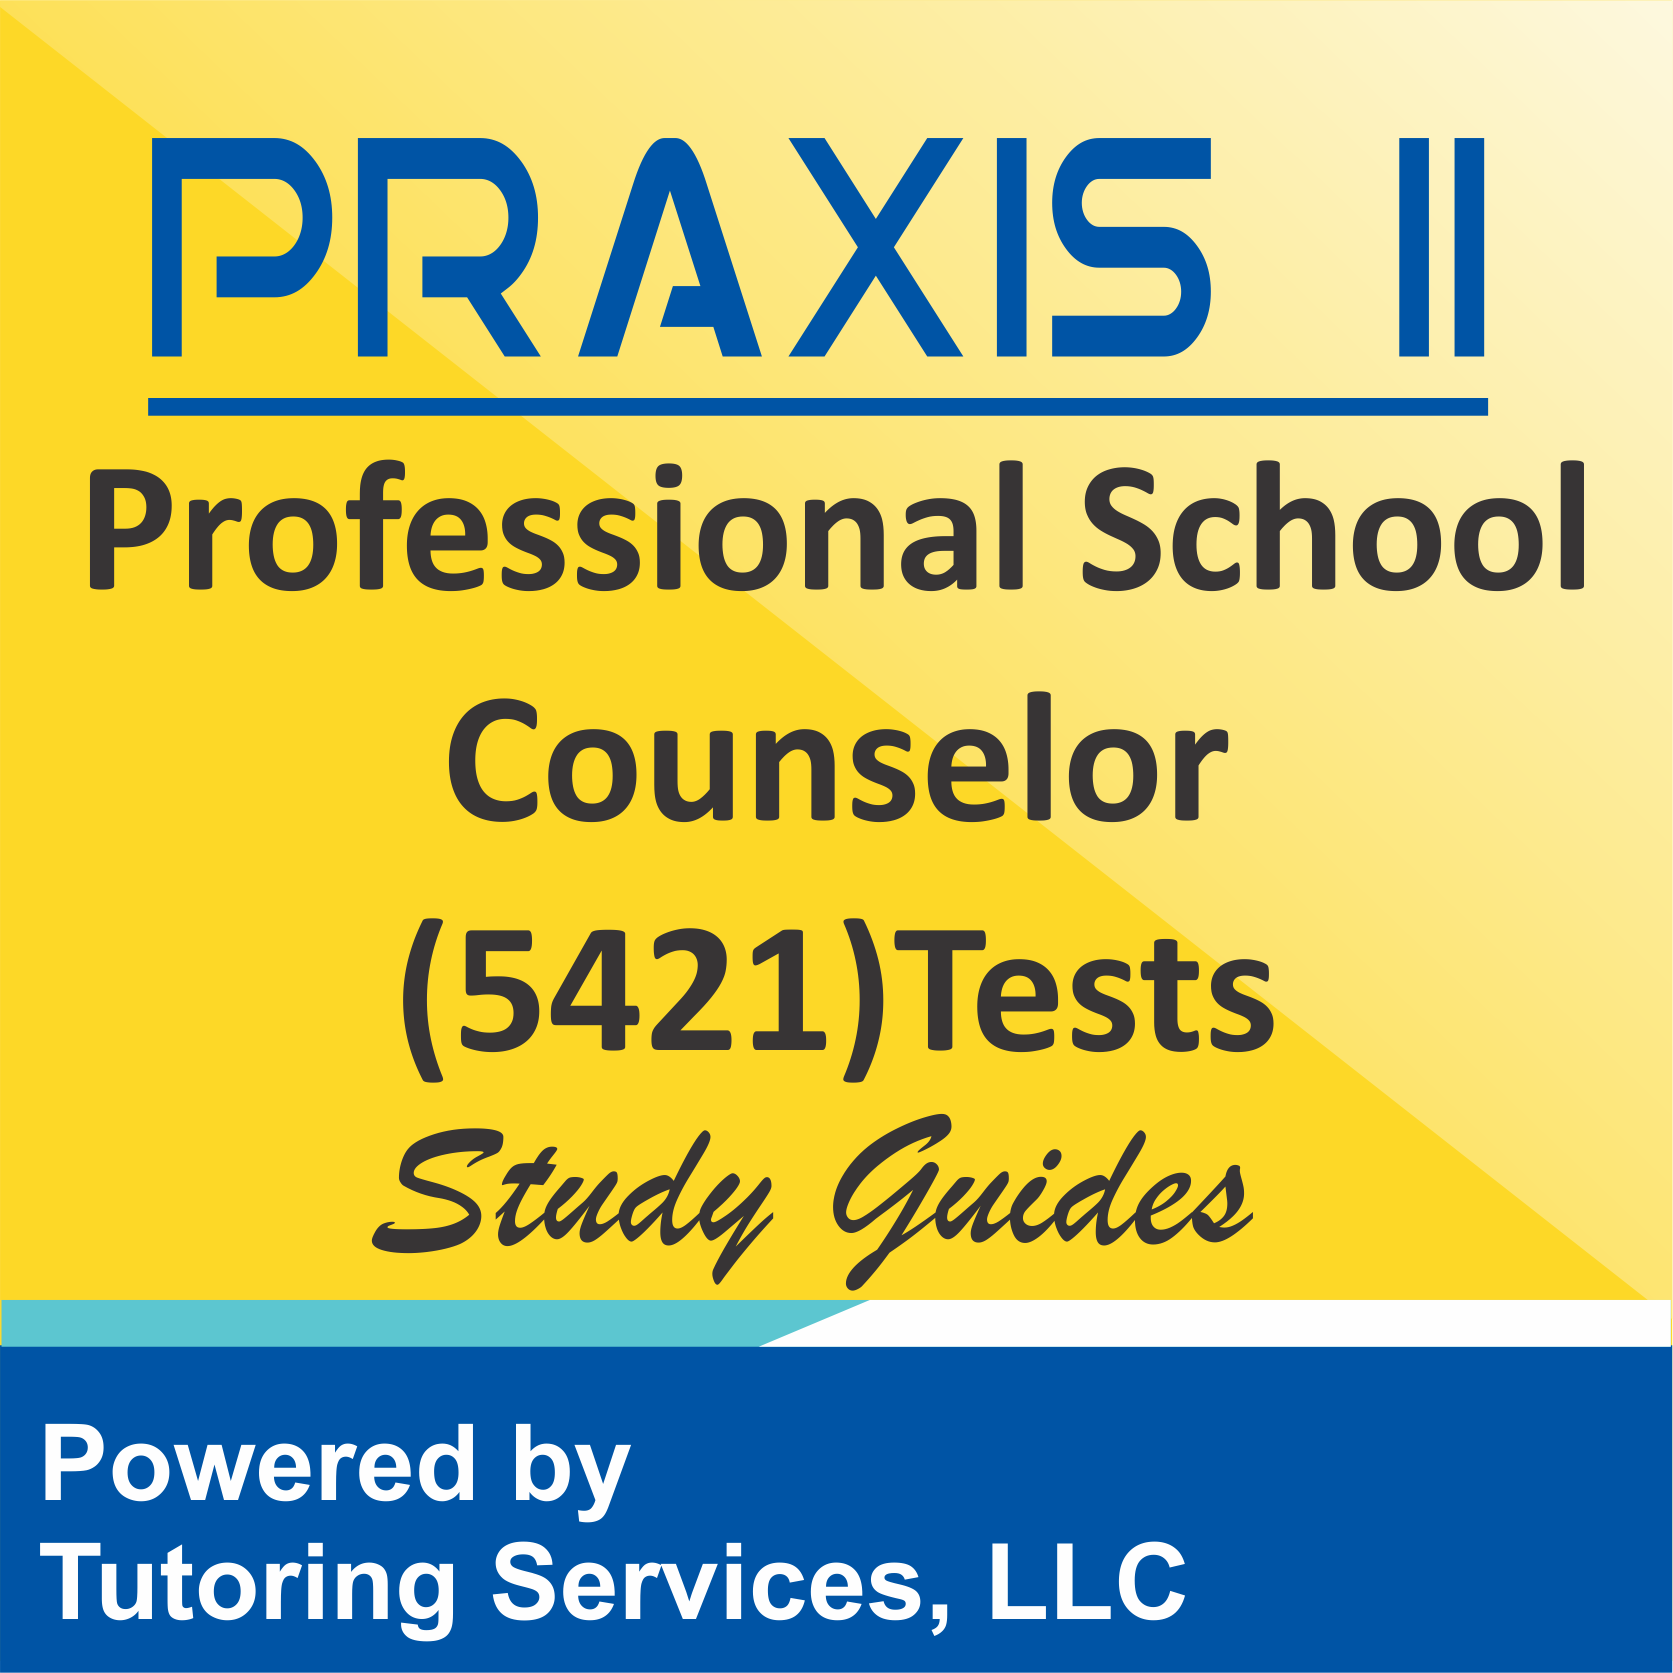 Praxis II Professional School Counselor (5421) Examination Format